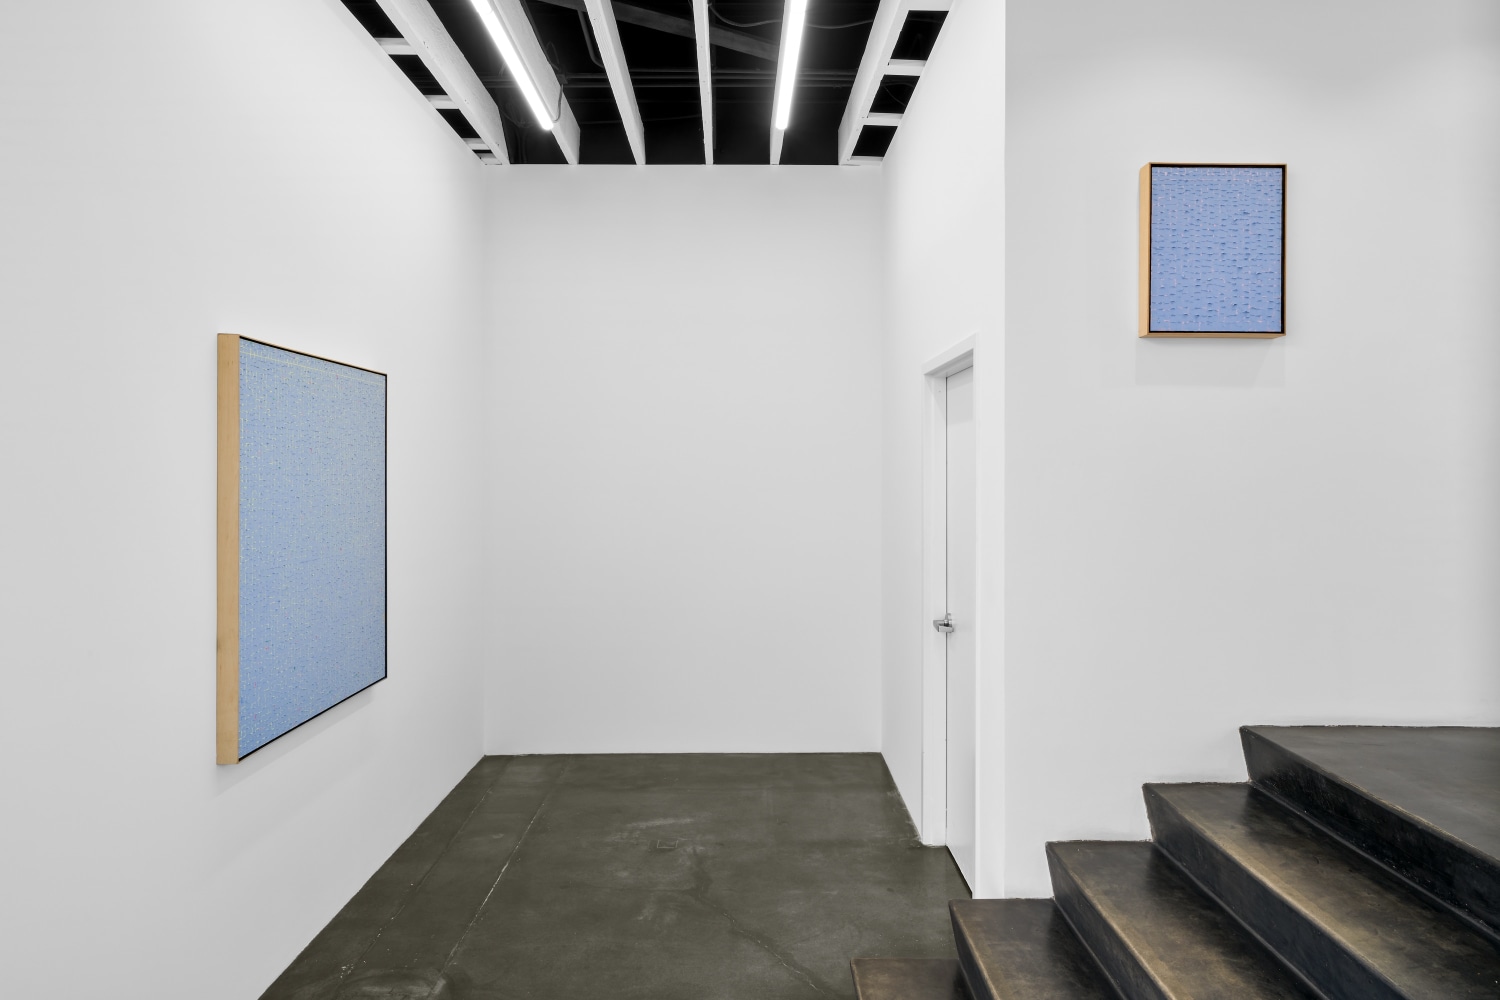 Young-Il Ahn: Memories of Water (installation view)